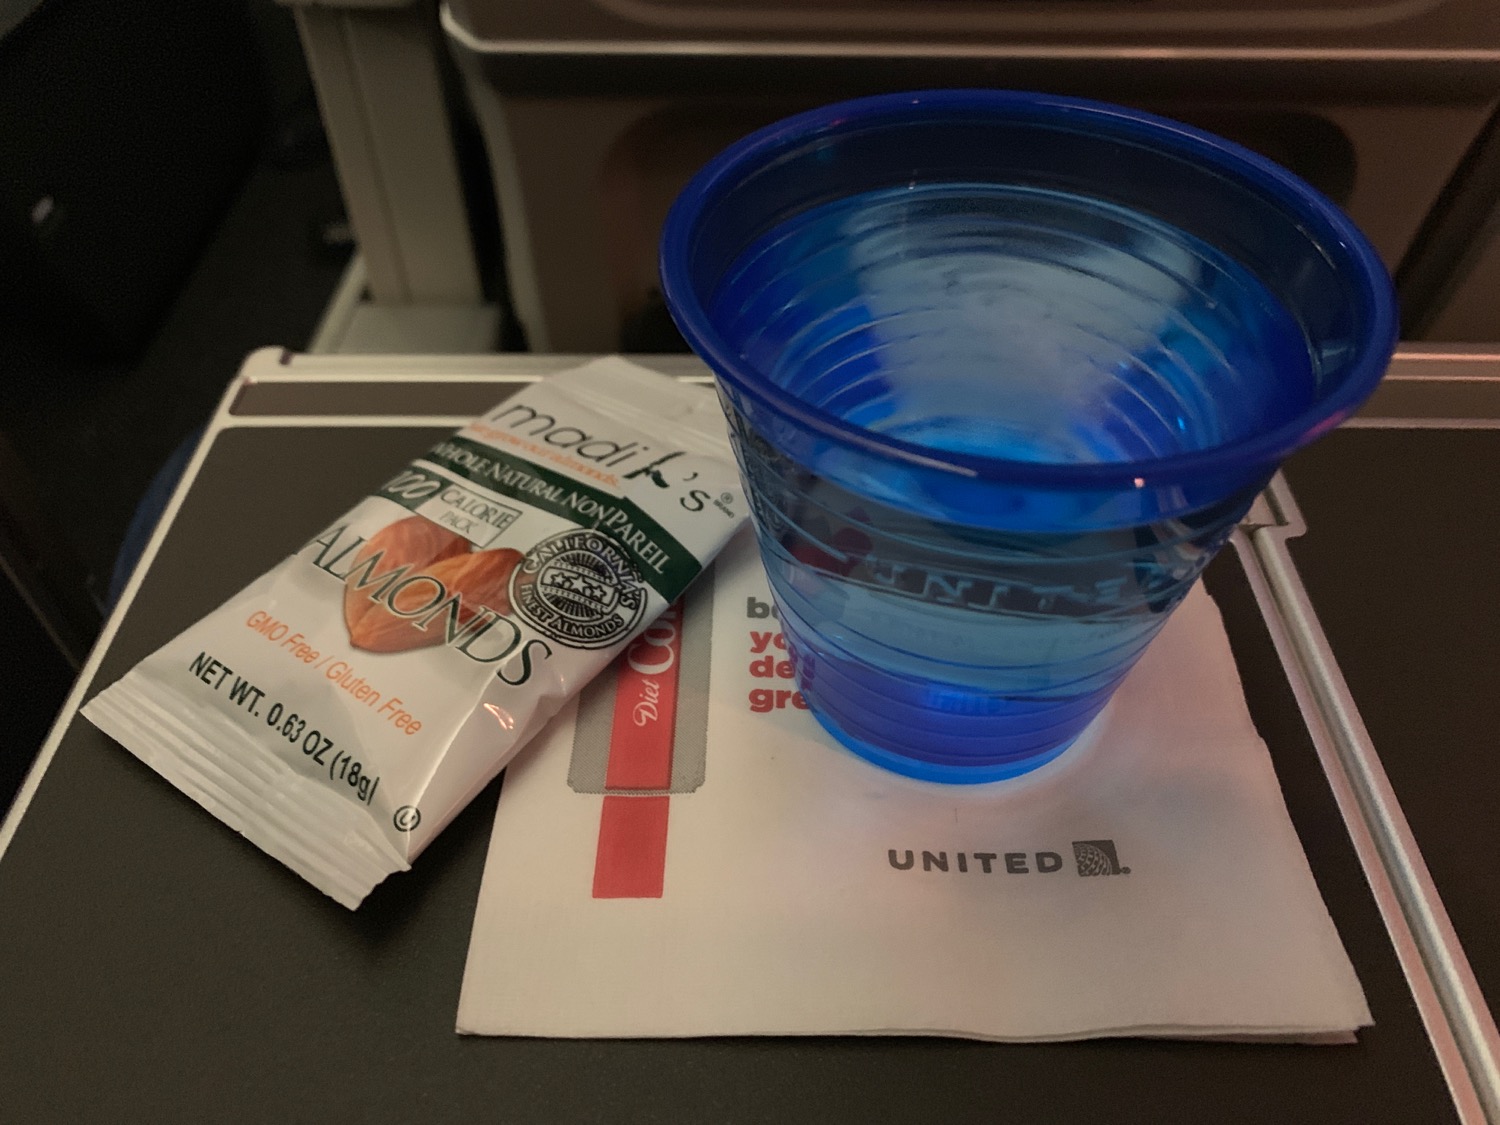 a blue plastic cup and a packet of almonds on a white napkin